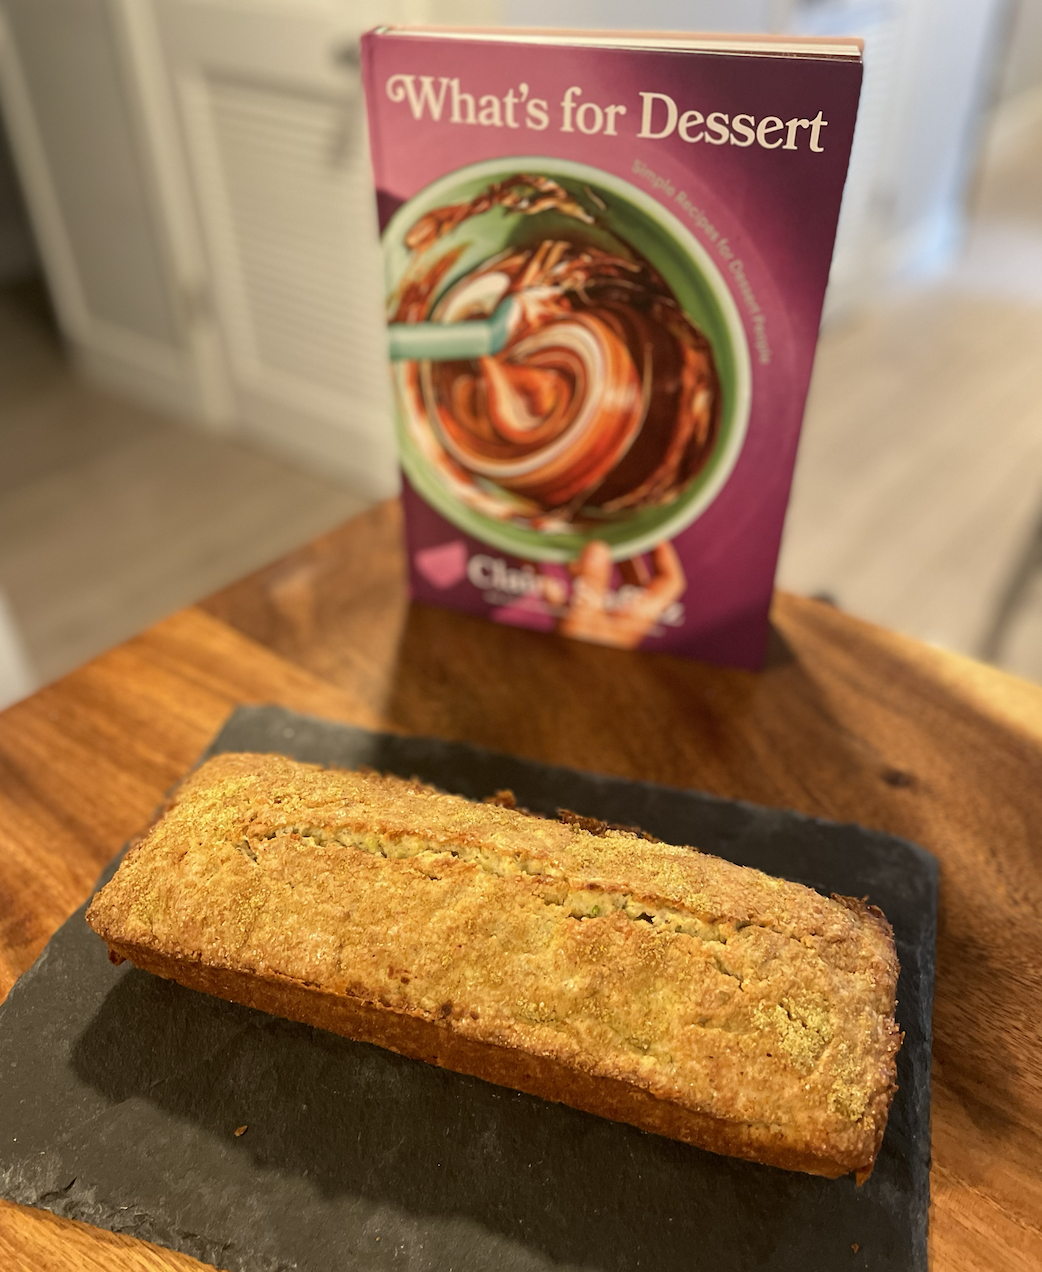 photo of a golden loaf cake on a slate serving board on a wooden table next to the cookbook What's for Dessert